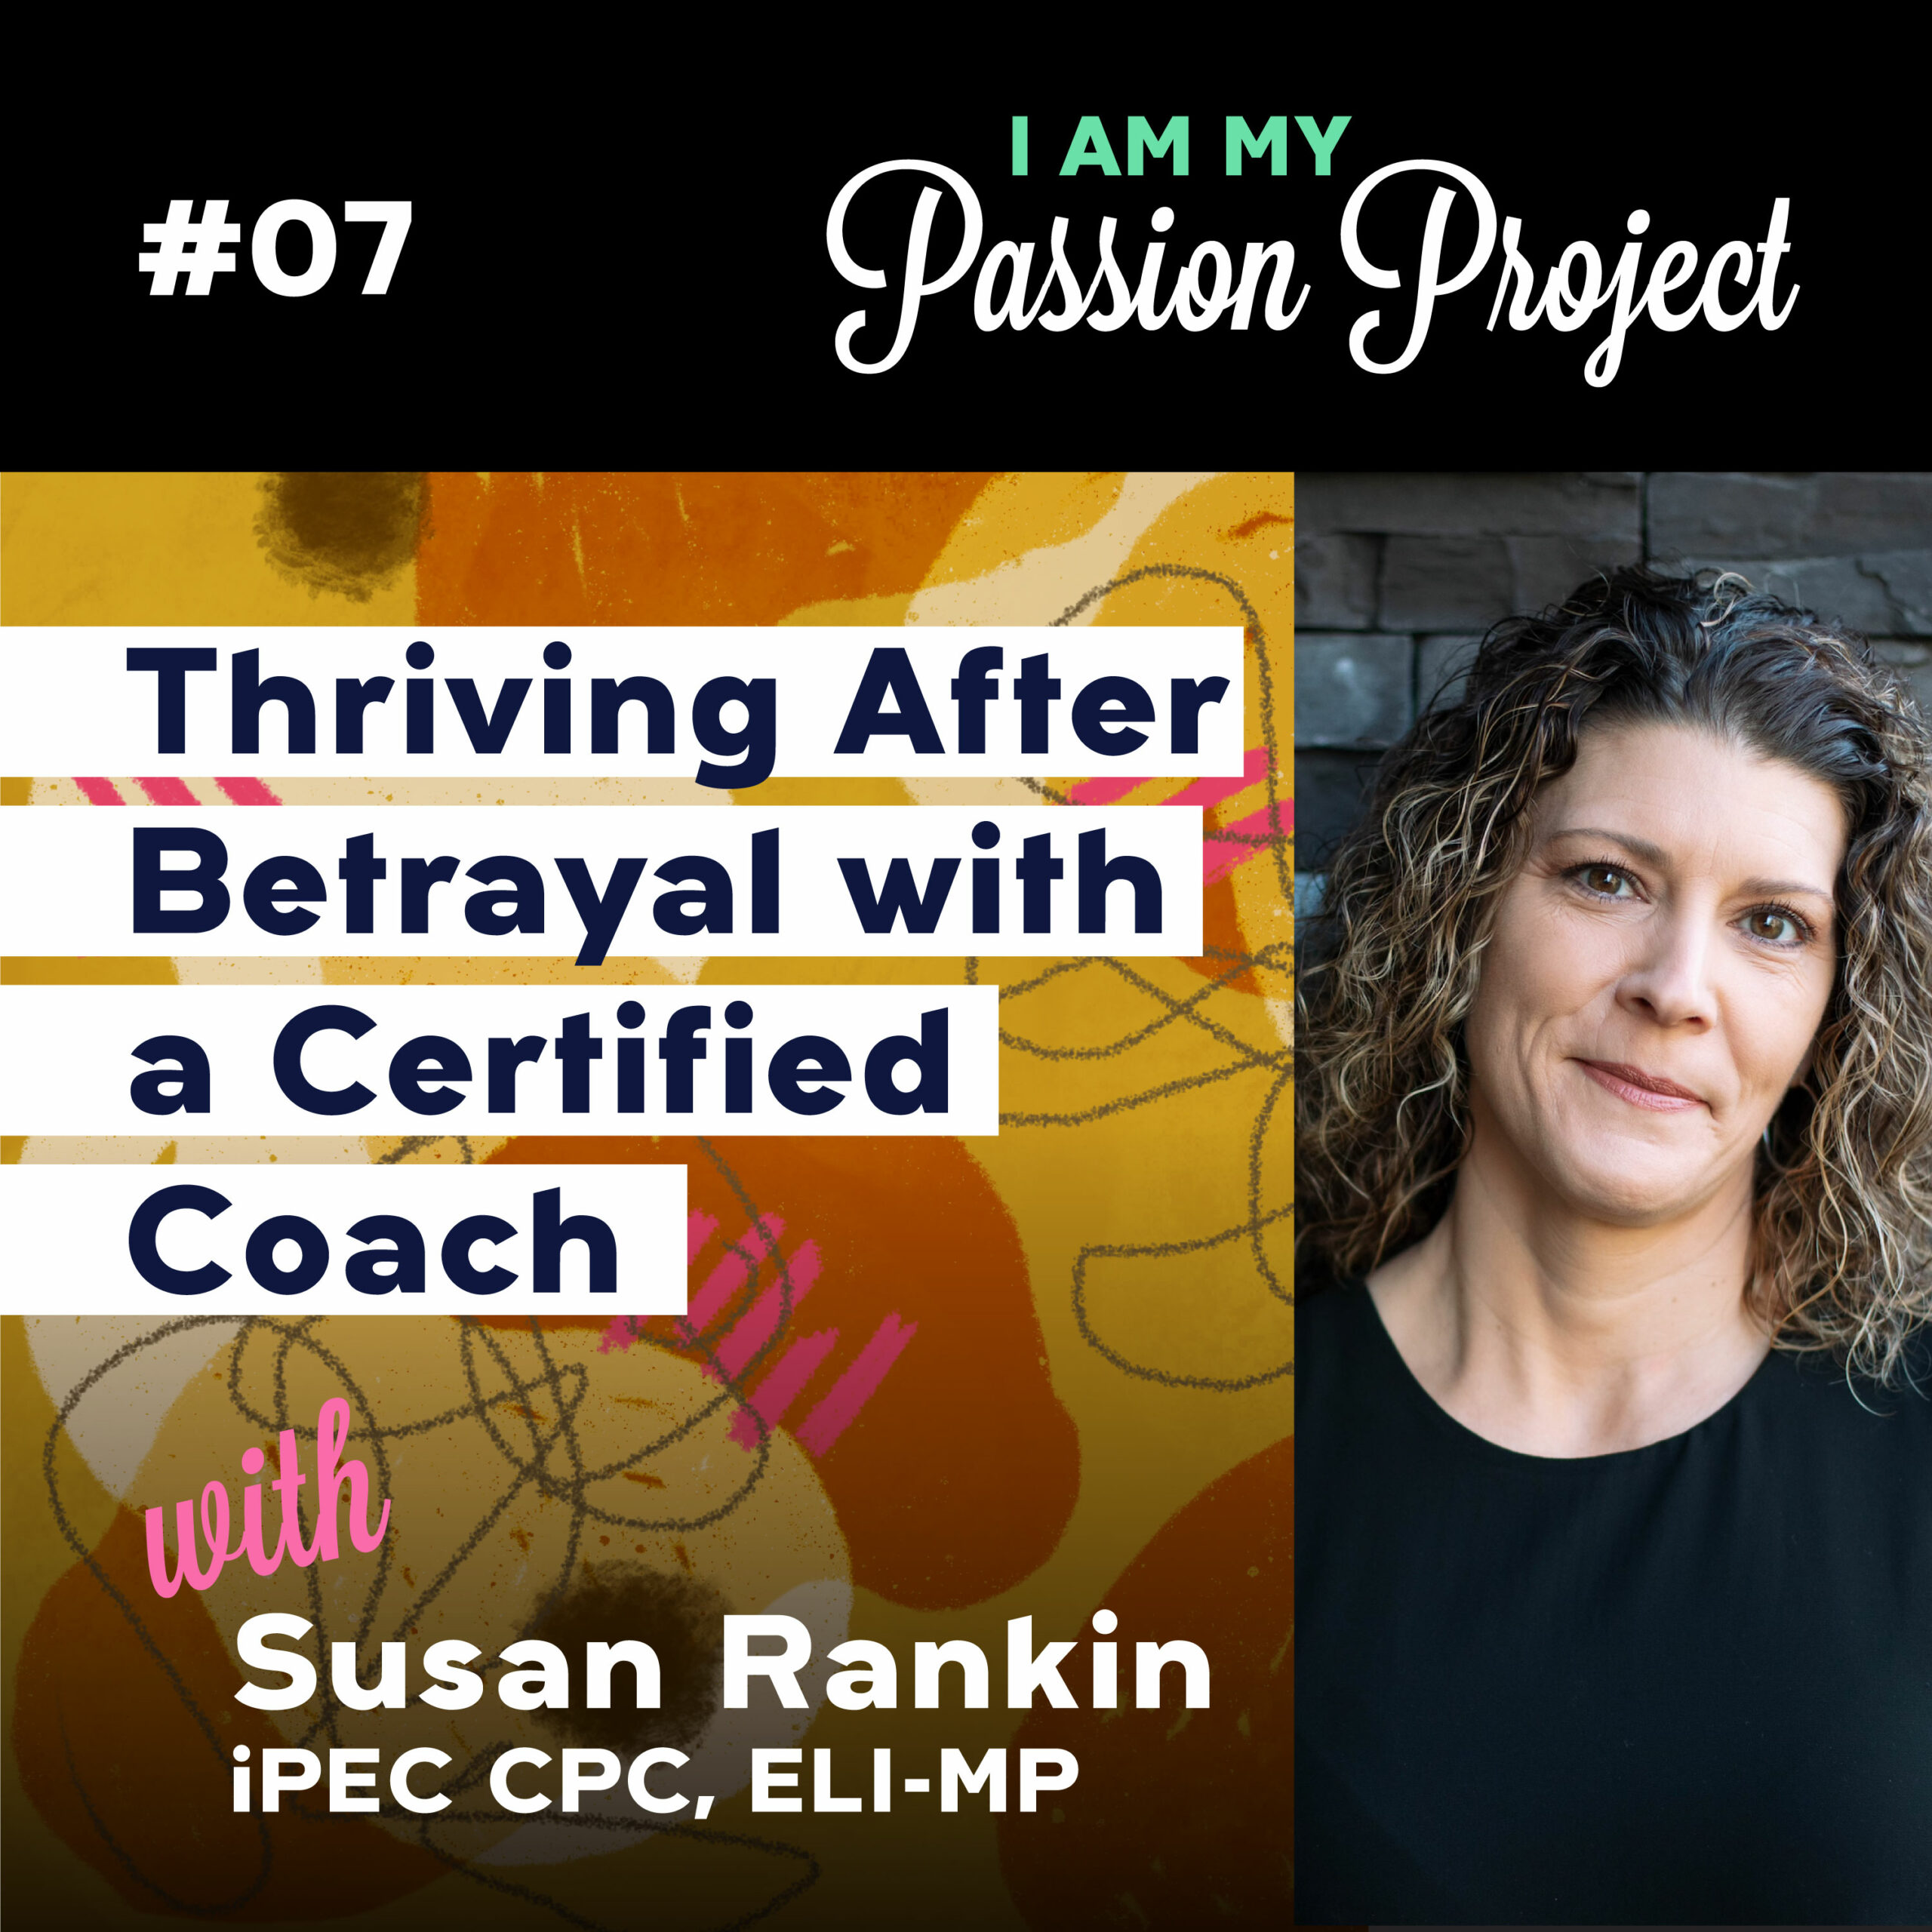 Thriving After Betrayal with a Certified Coach